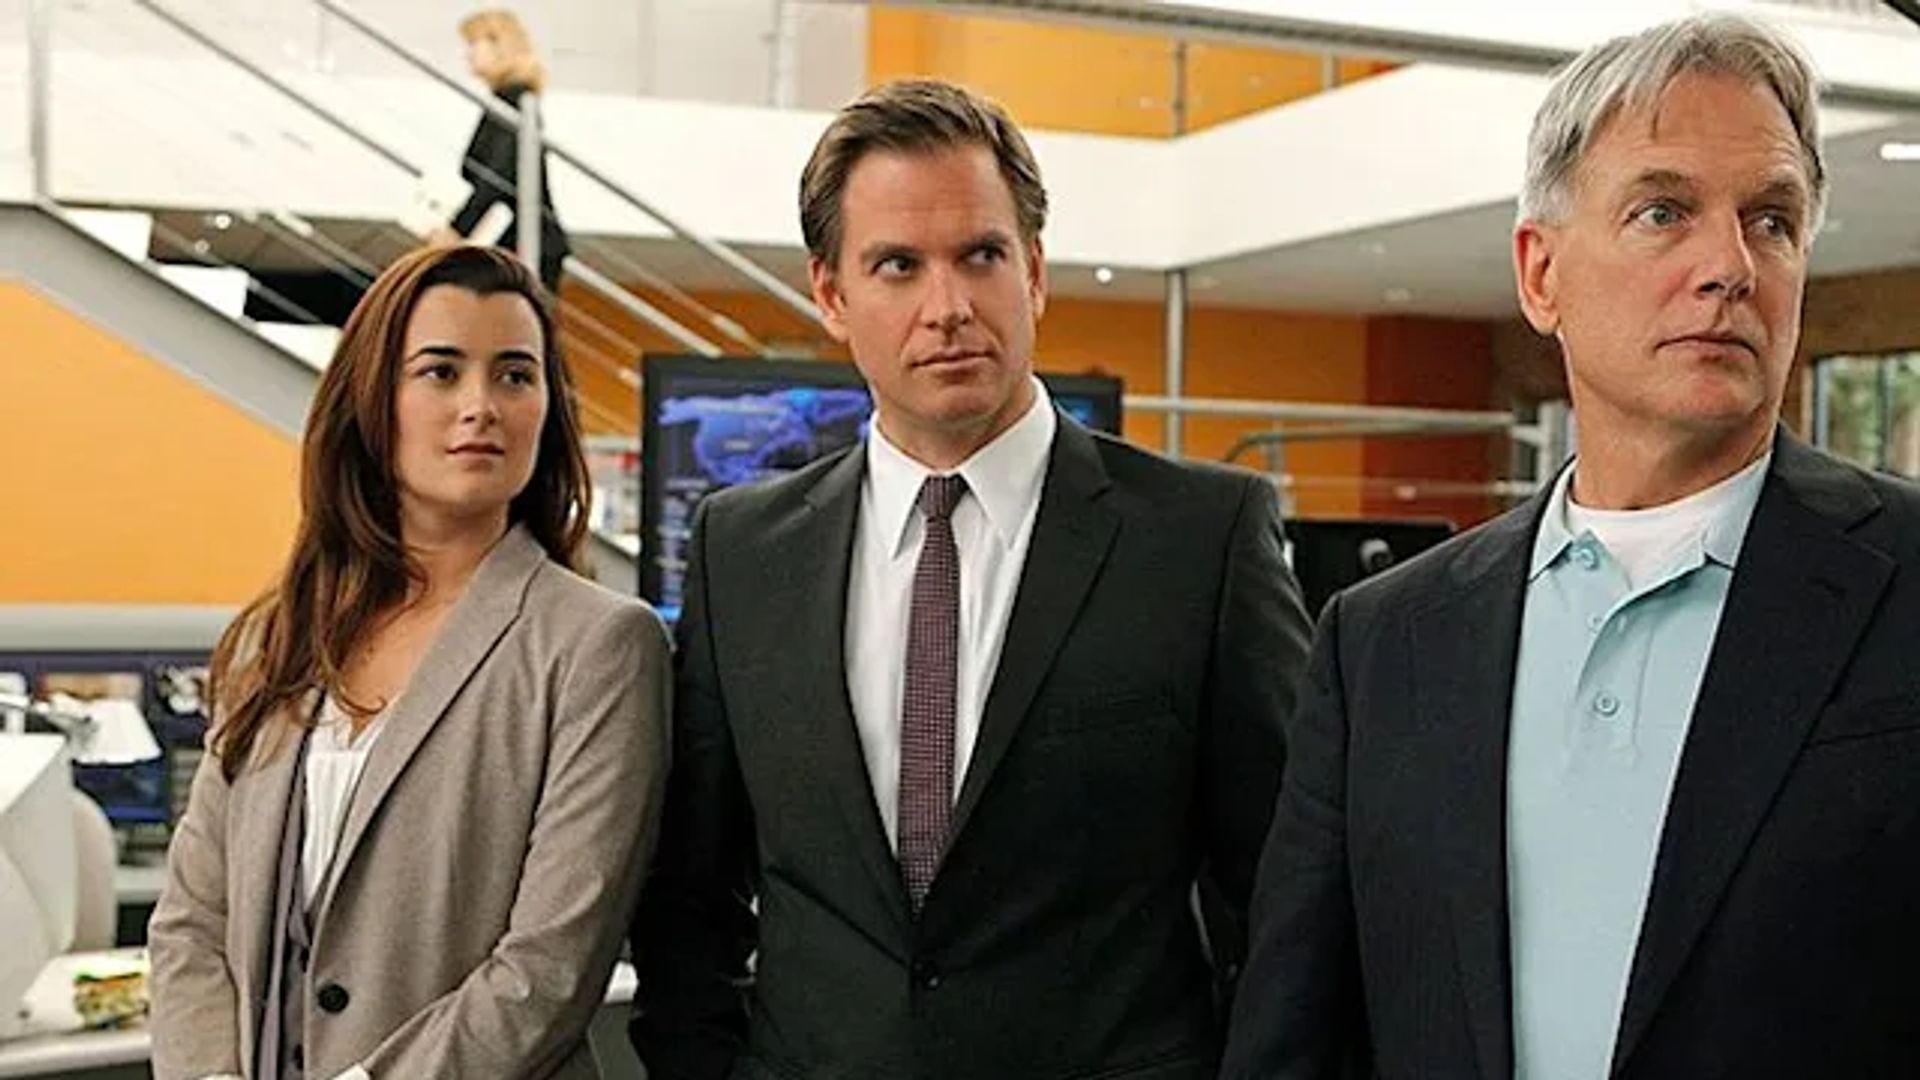 NCIS stars Michael Weatherly announces major news with incredible video